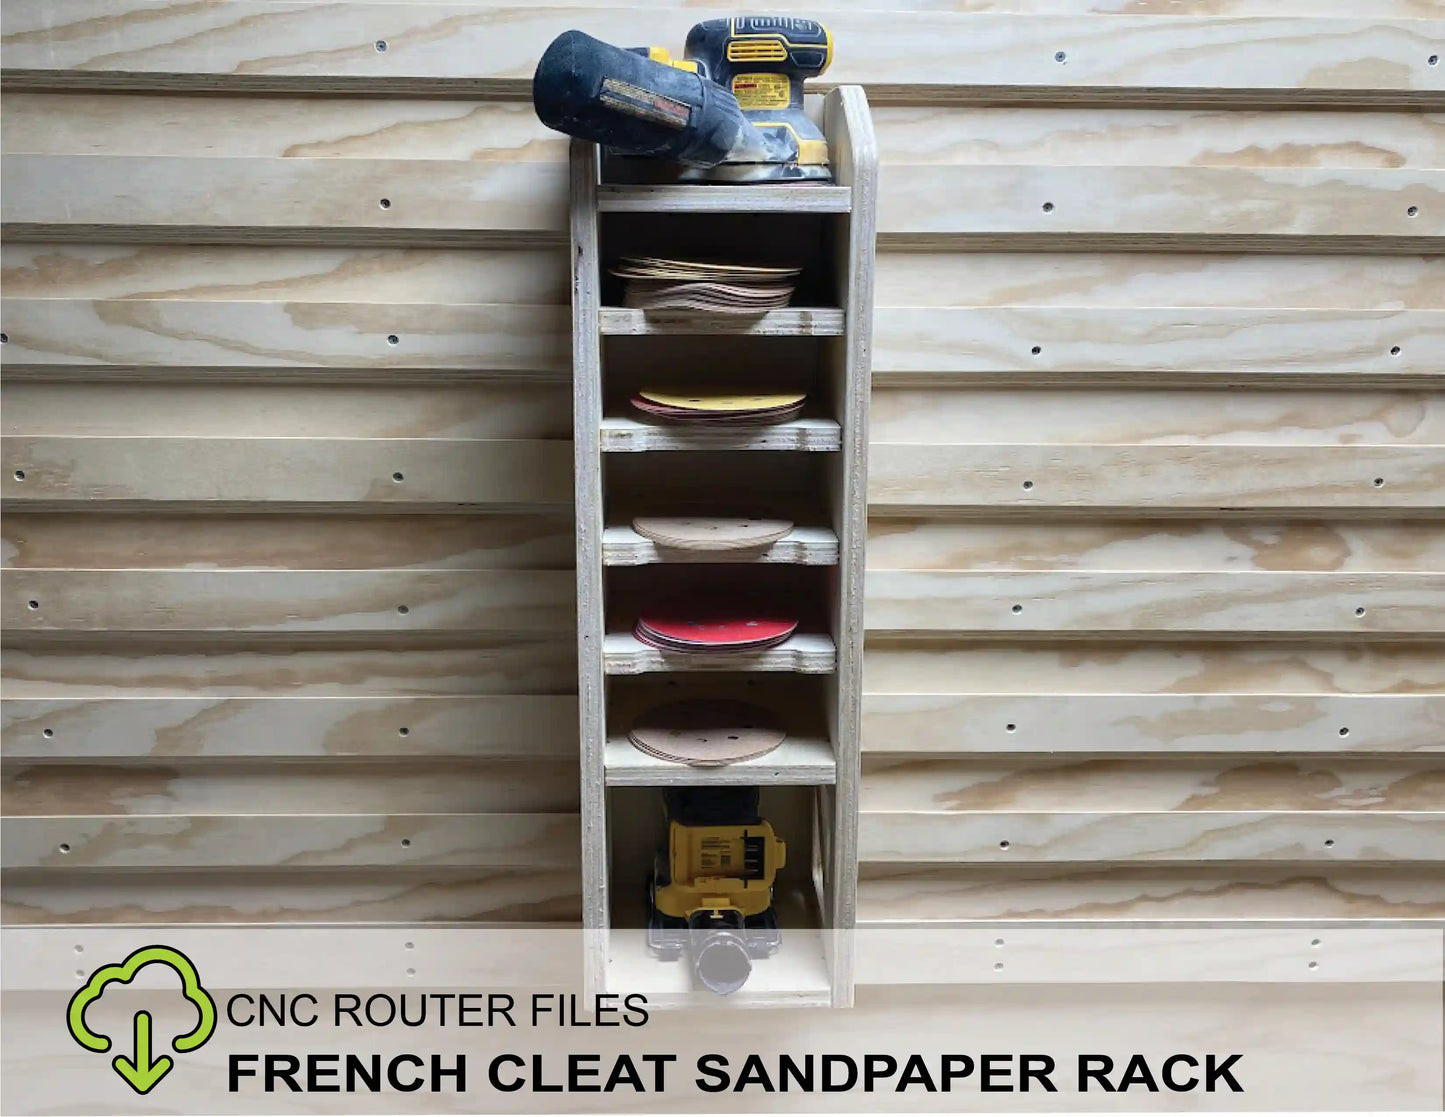 CNC Router Files French Cleat Sandpaper Rack Medium